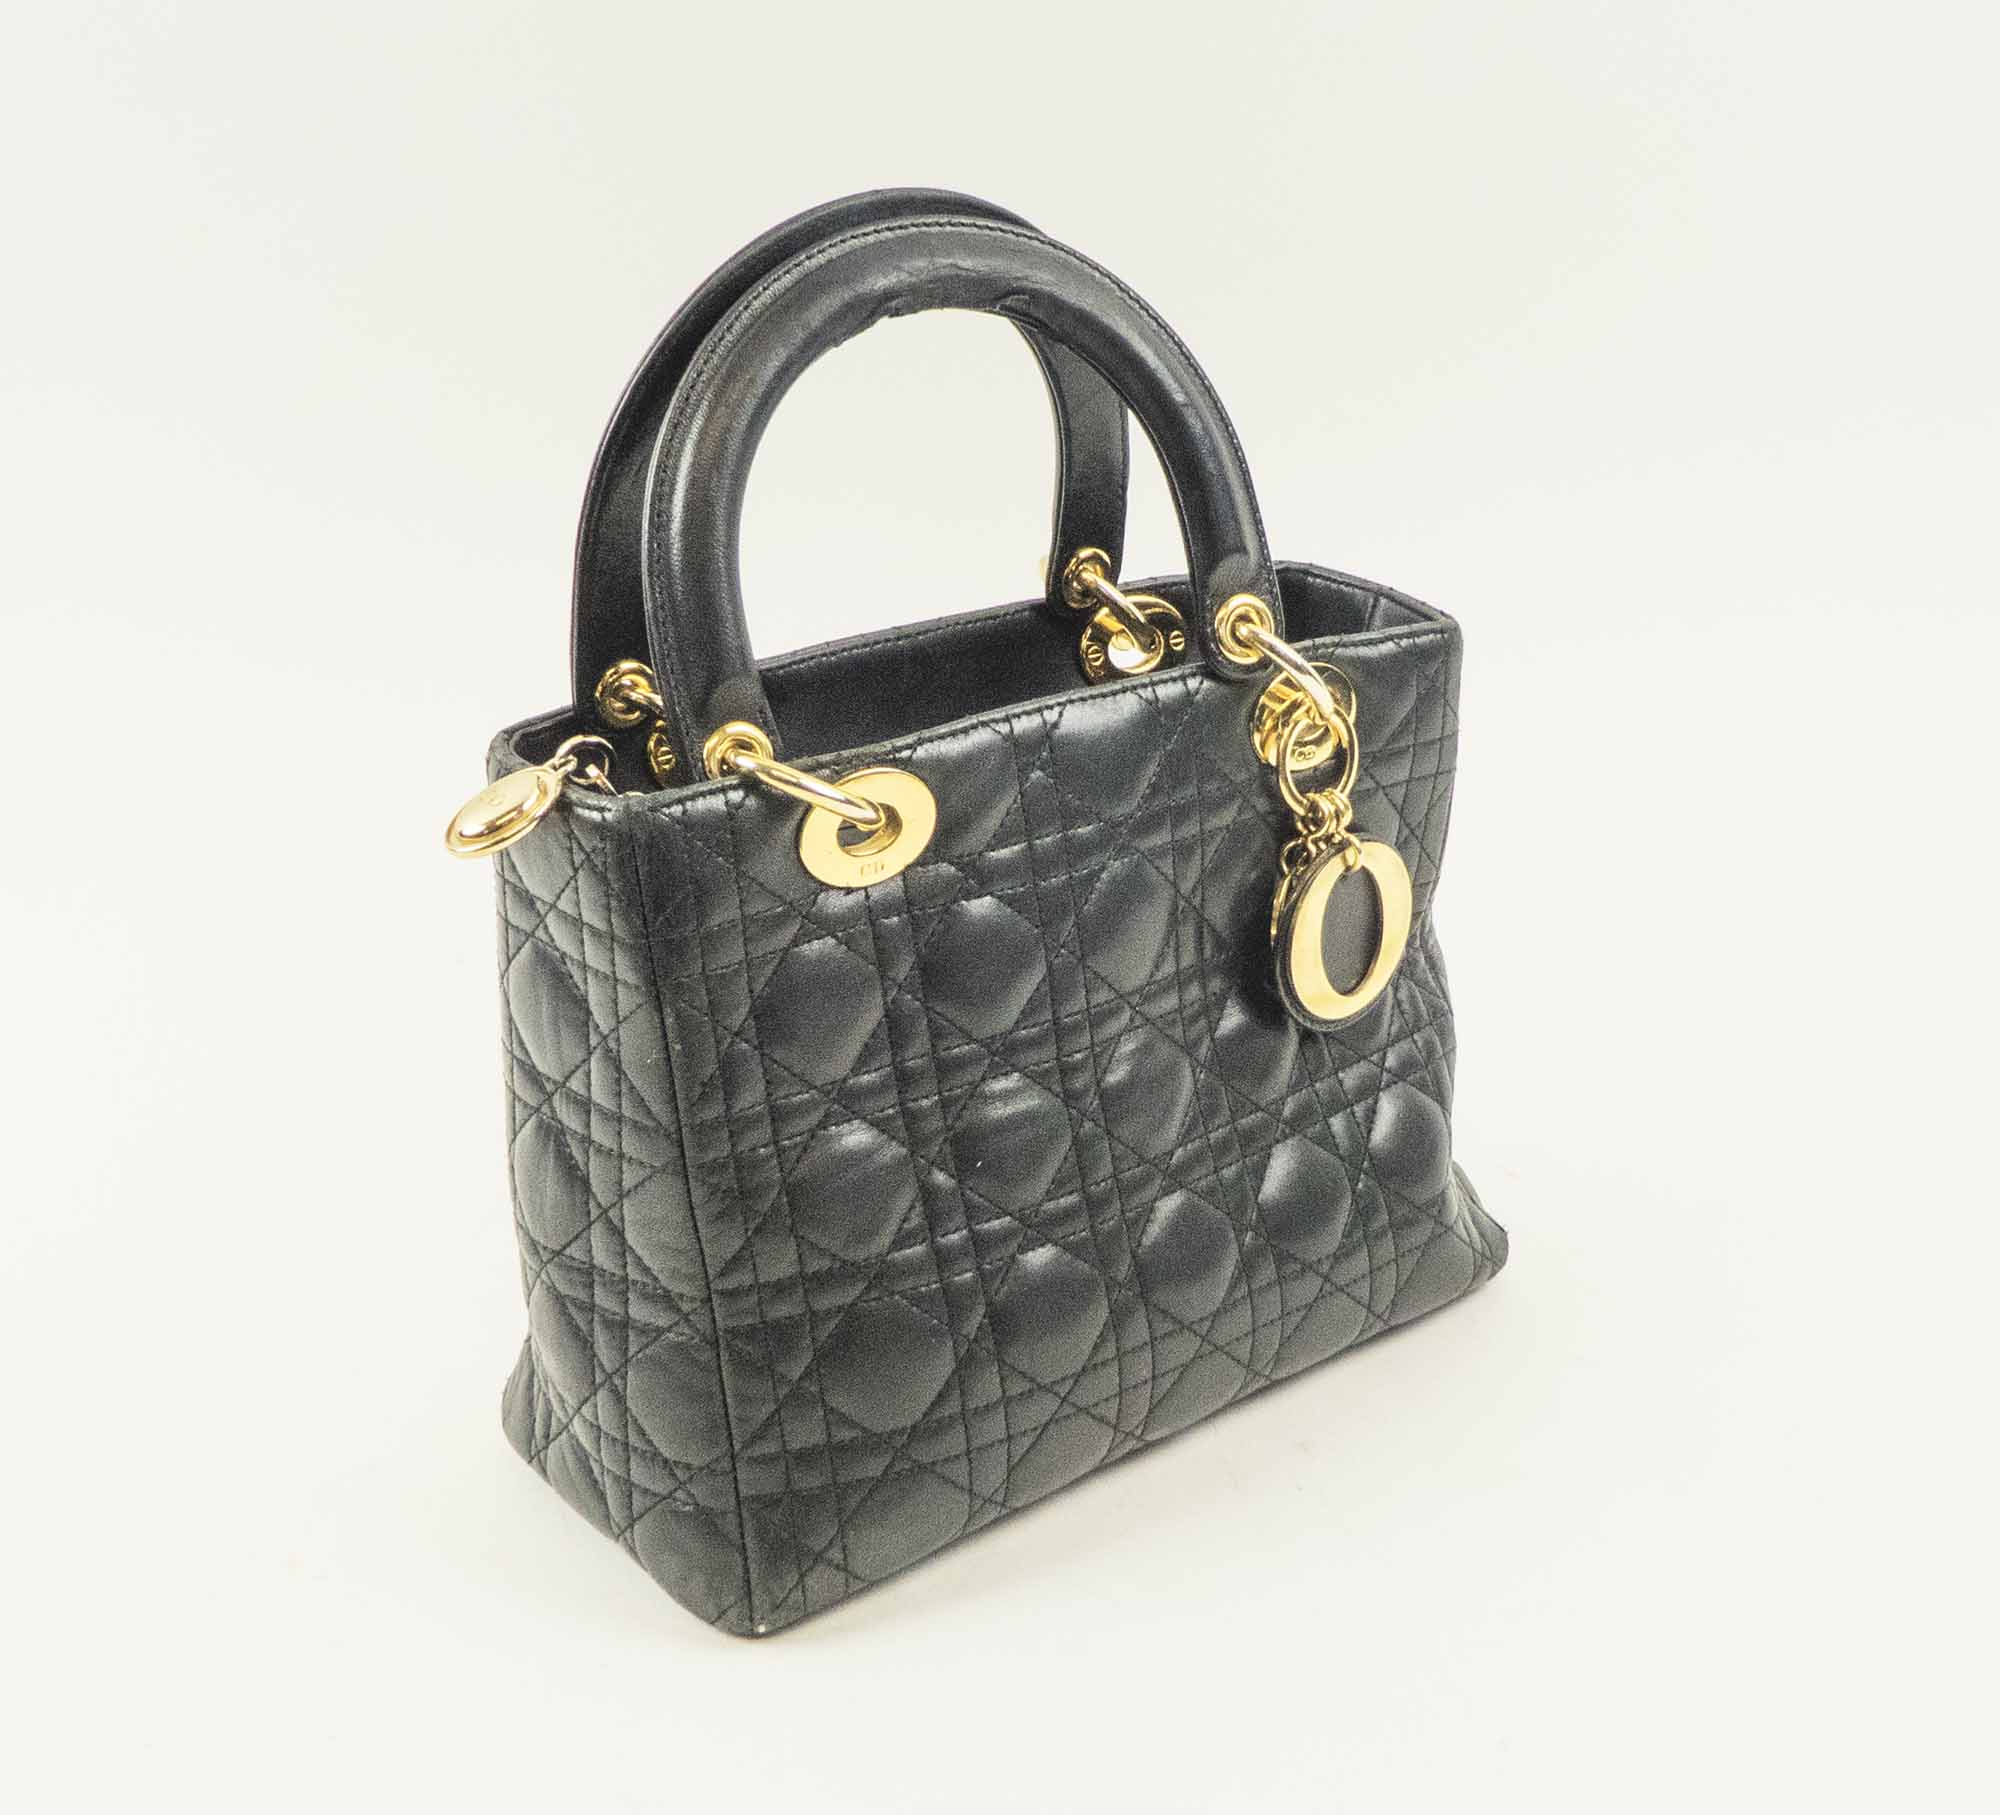 LADY DIOR VINTAGE HANDBAG quilted leather with gold tone hardware and top  zip closure two top handles bottom feet and red fabric lining 25cm x  19cm H x 12cm